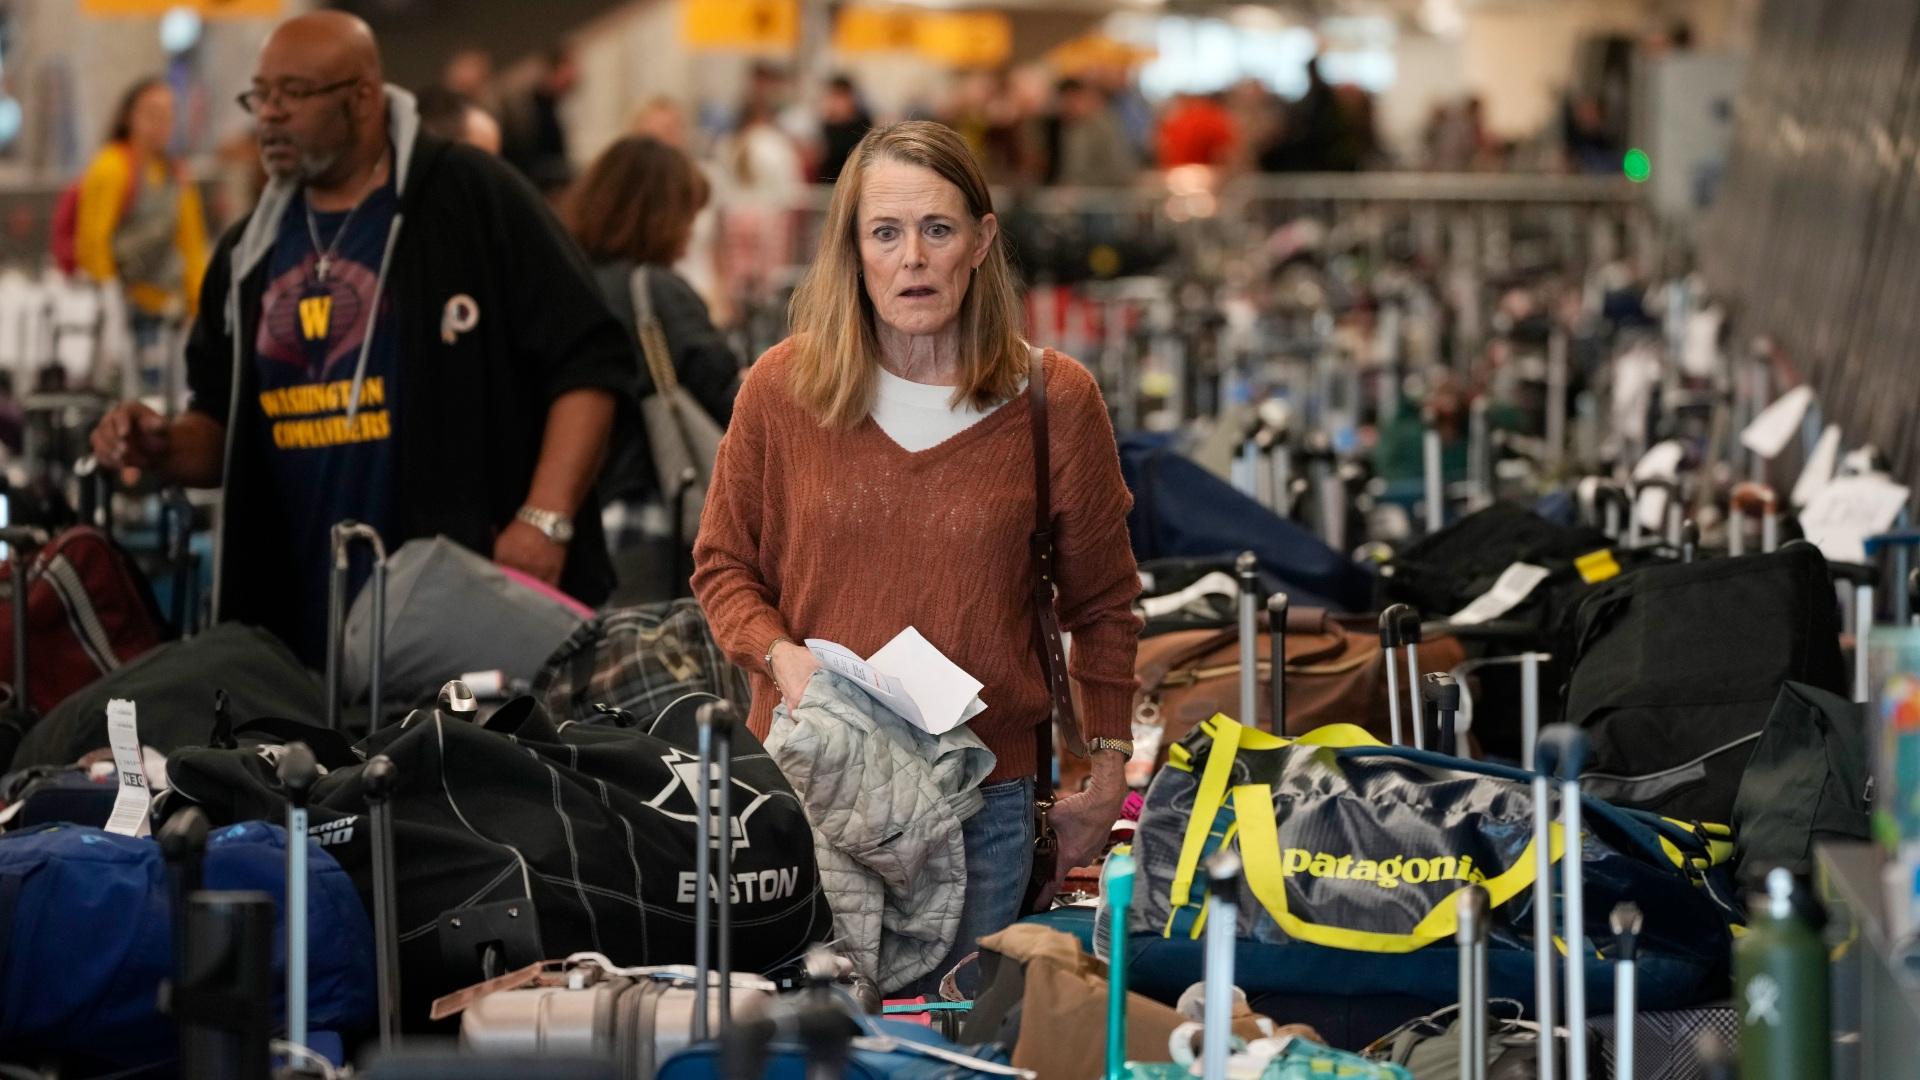 A traveler wades through the field of unclaimed bags at the Southwest Airlines luggage carousels at Denver International Airport, Tuesday, Dec. 27, 2022, in Denver. (AP Photo / David Zalubowski)